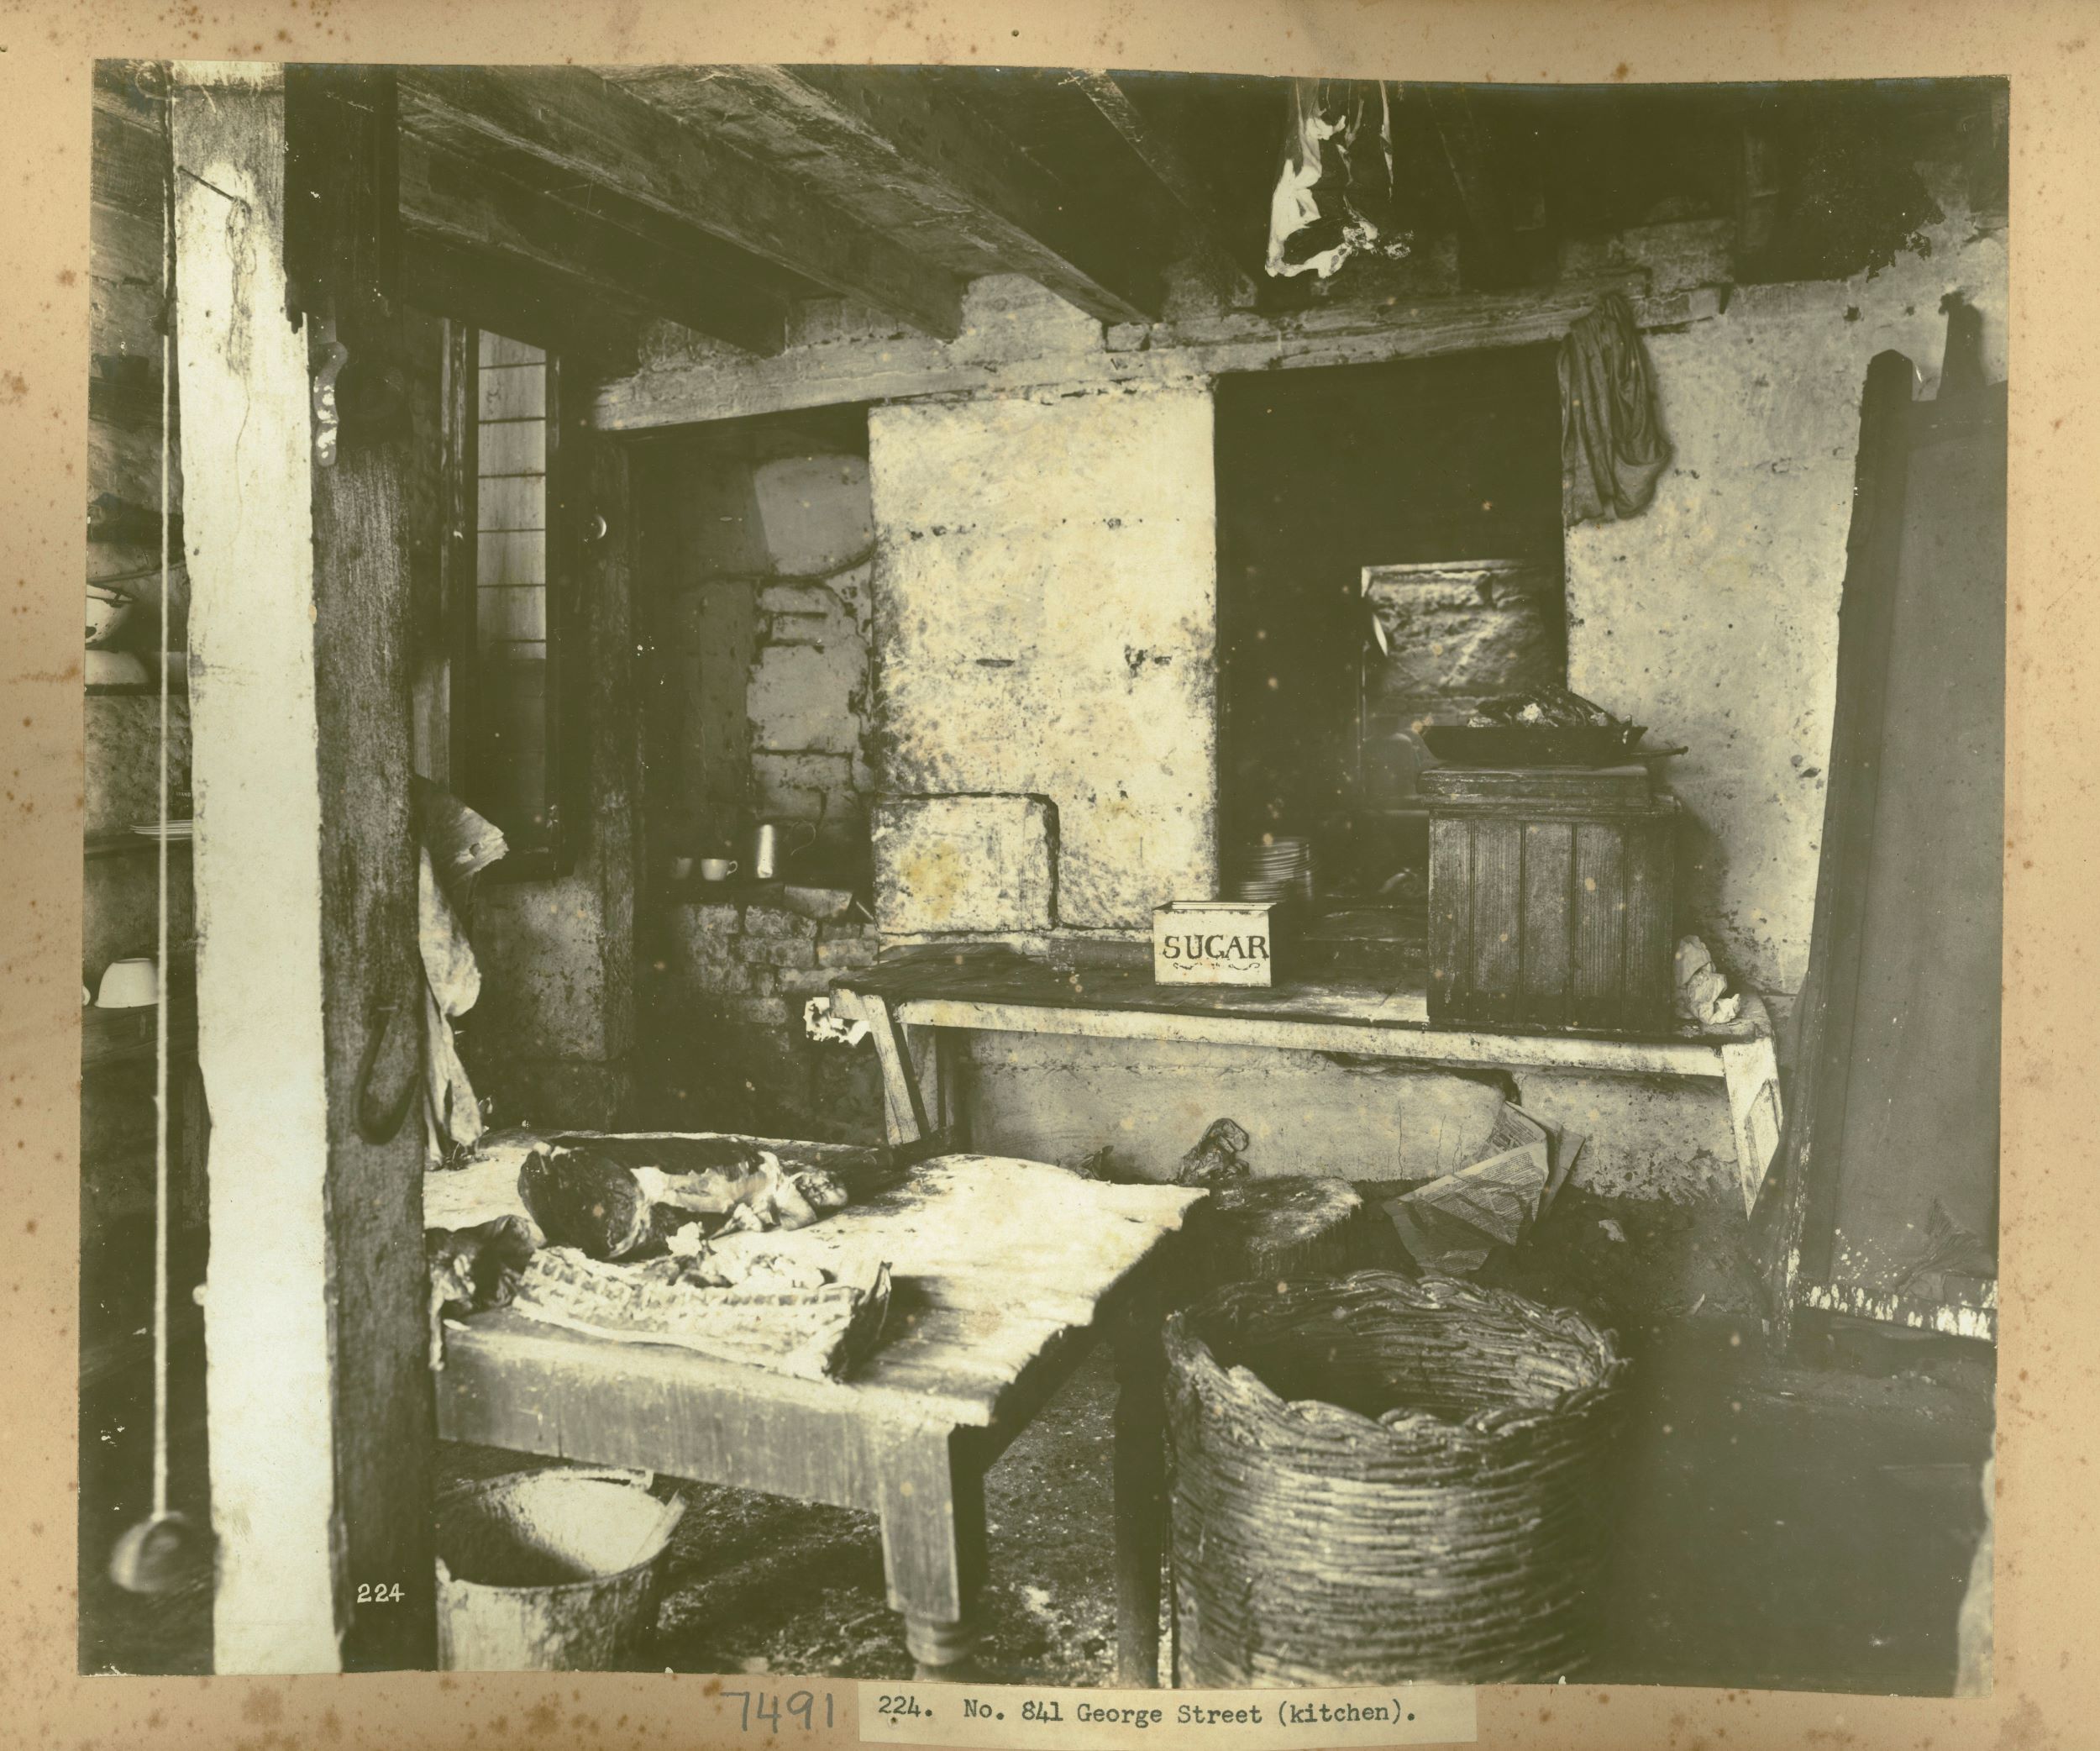 An old kitchen with dirty benches and walls. Cuts of meat sit on a work bench next to a large cane basket 